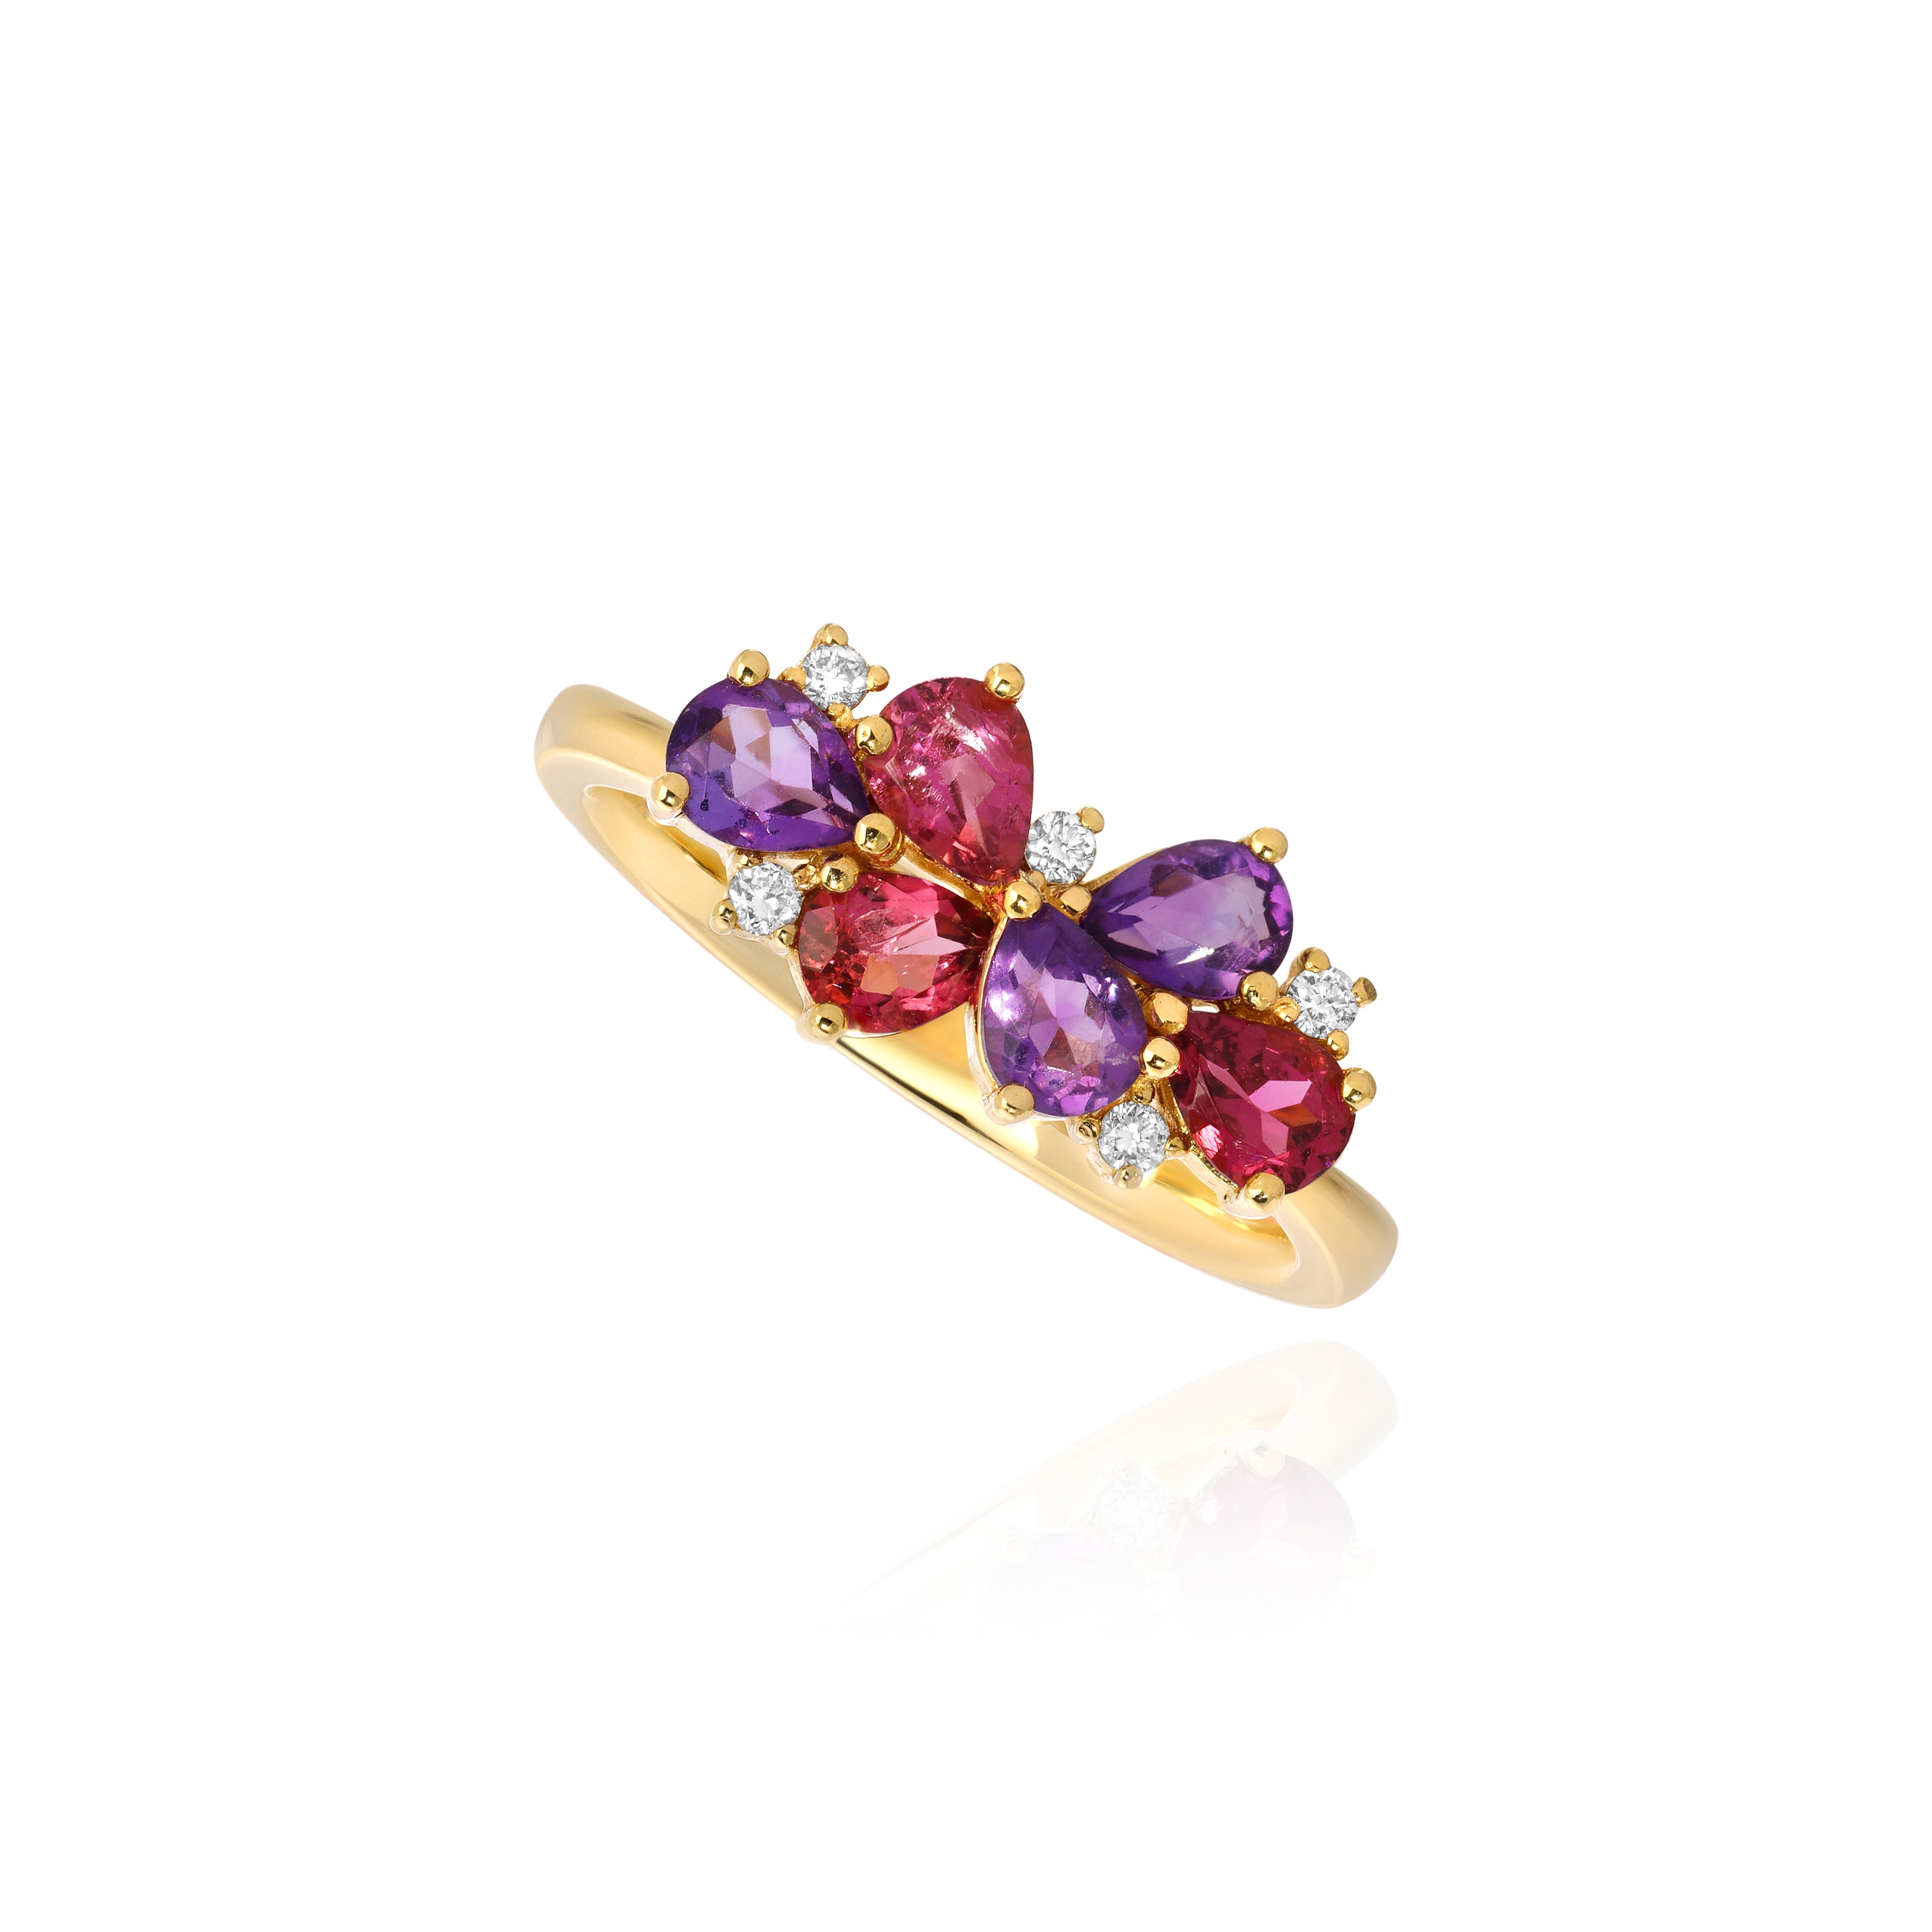 Yellow Gold Ring with pear shaped Pink Tourmaline and Sapphire, Amethyst, and small Diamonds, Small